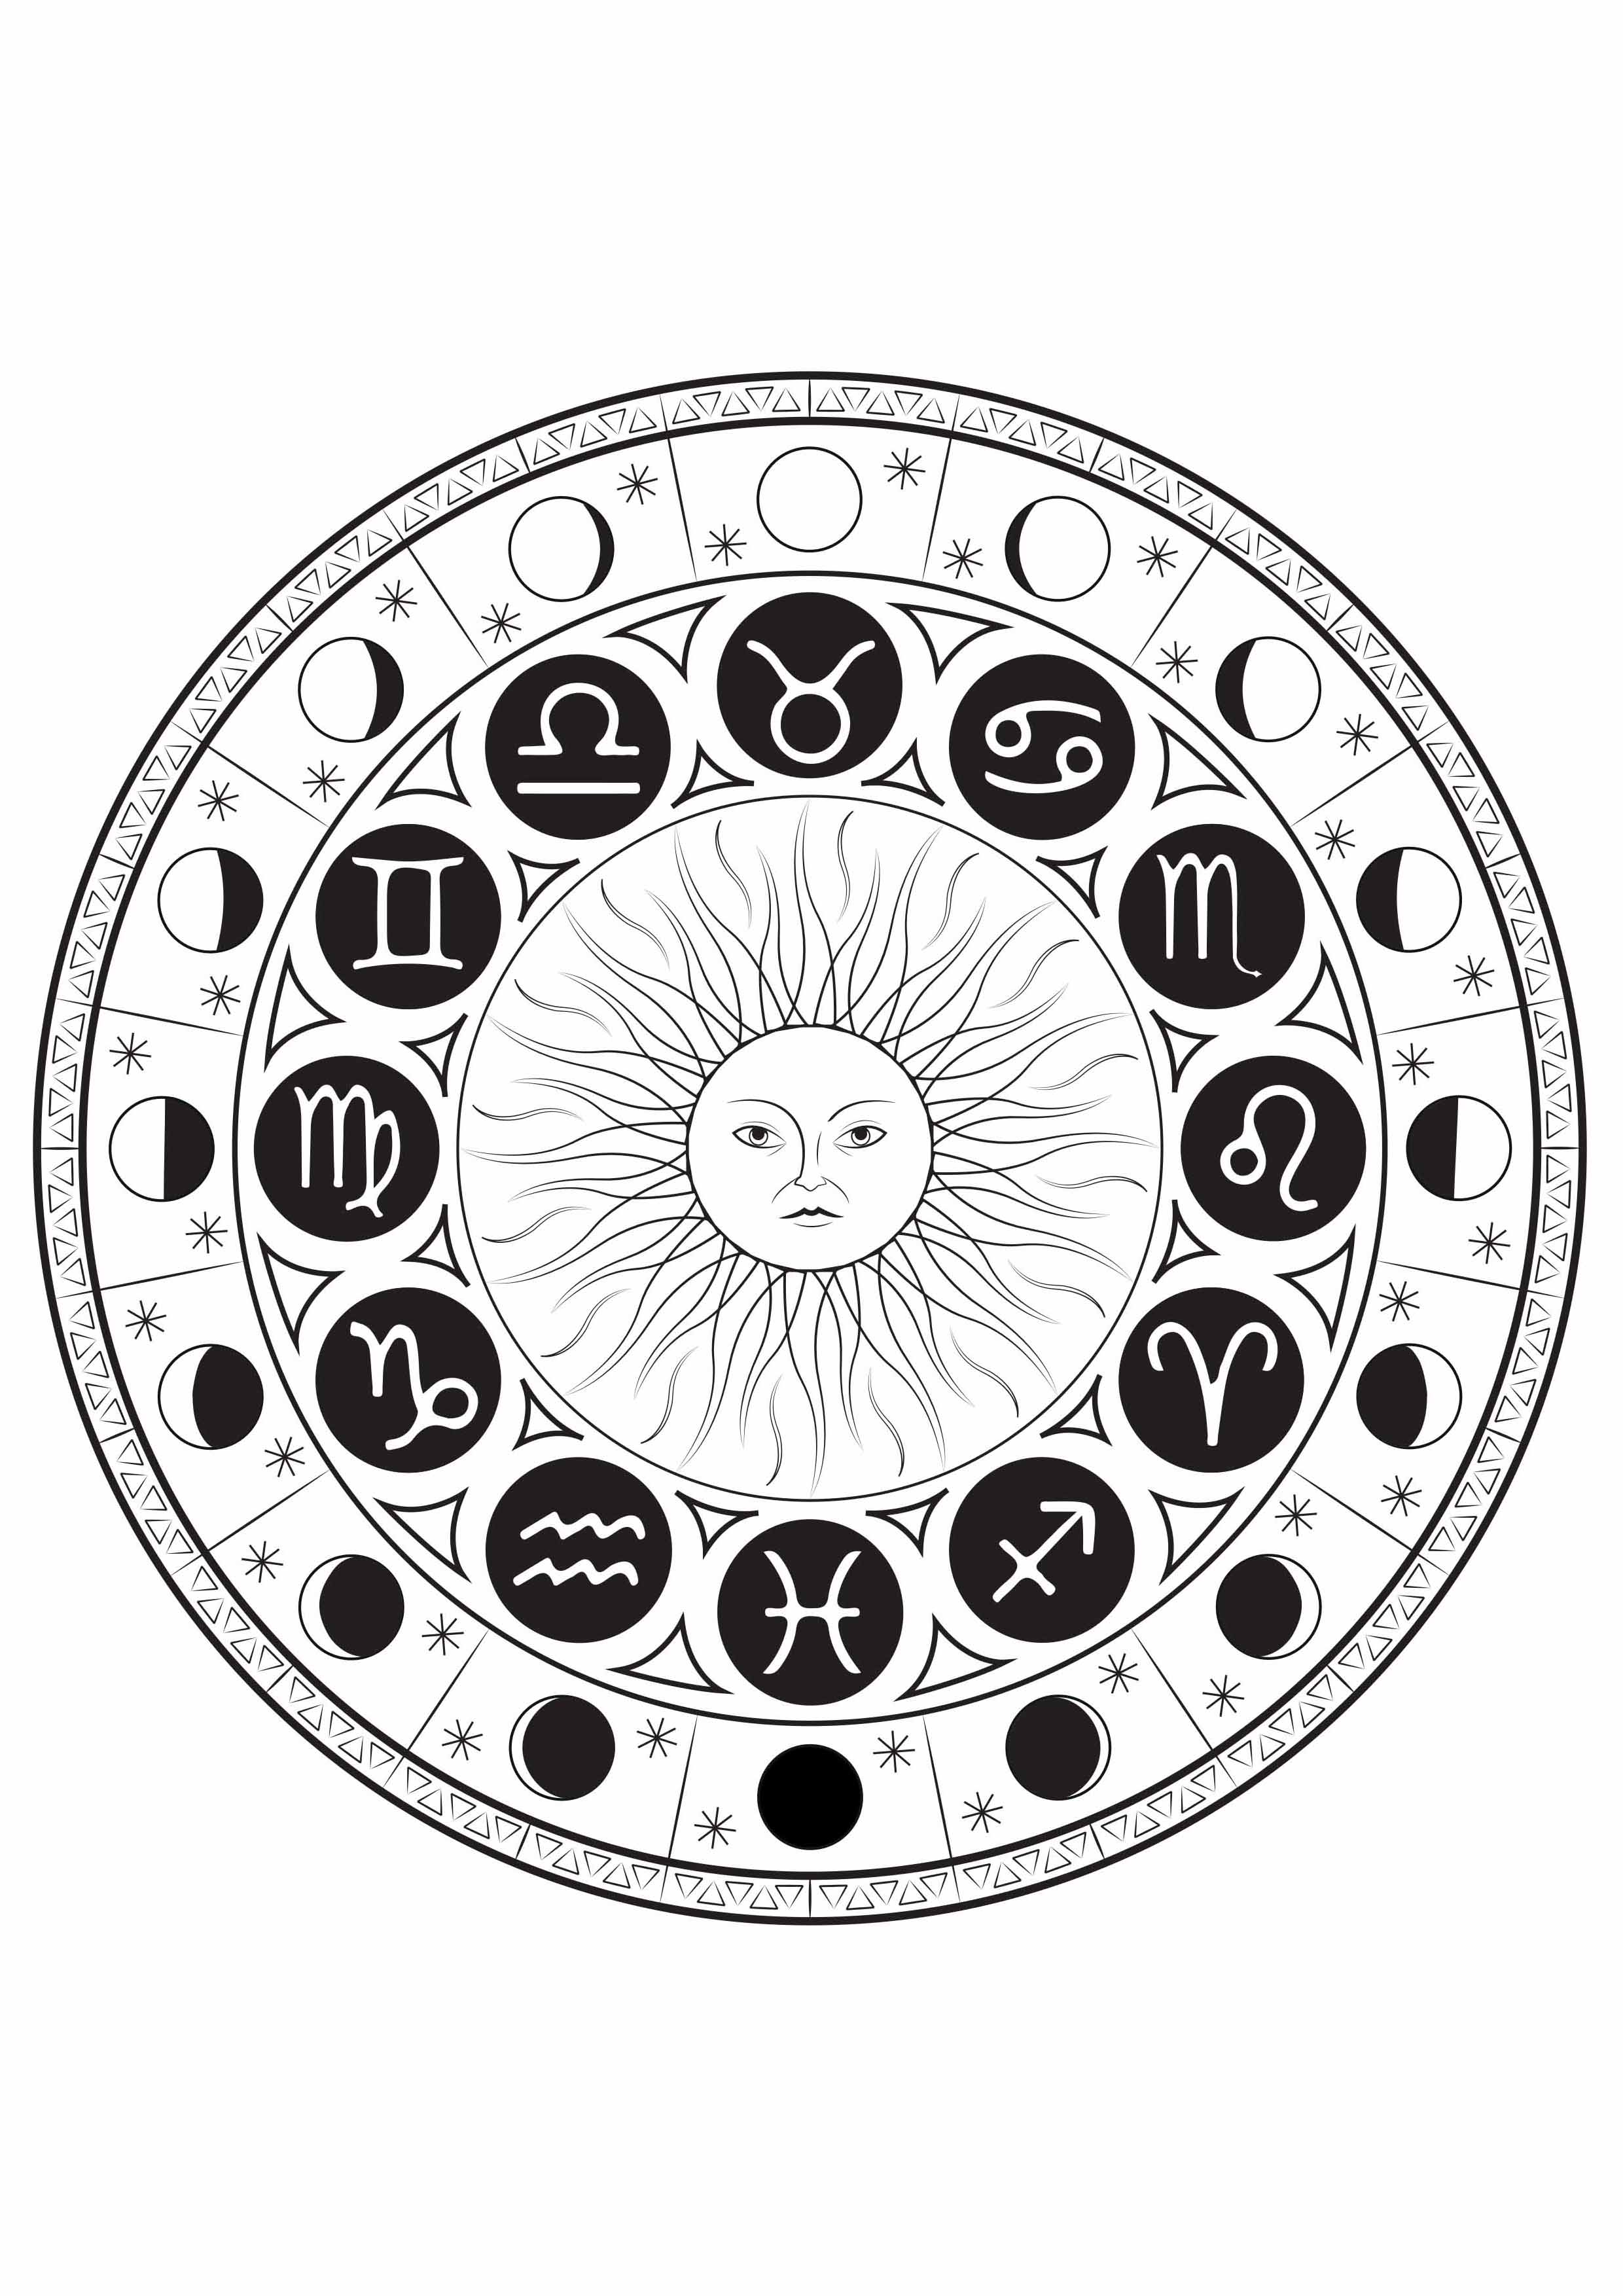 Download Astrological signs mandala - M&alas Adult Coloring Pages